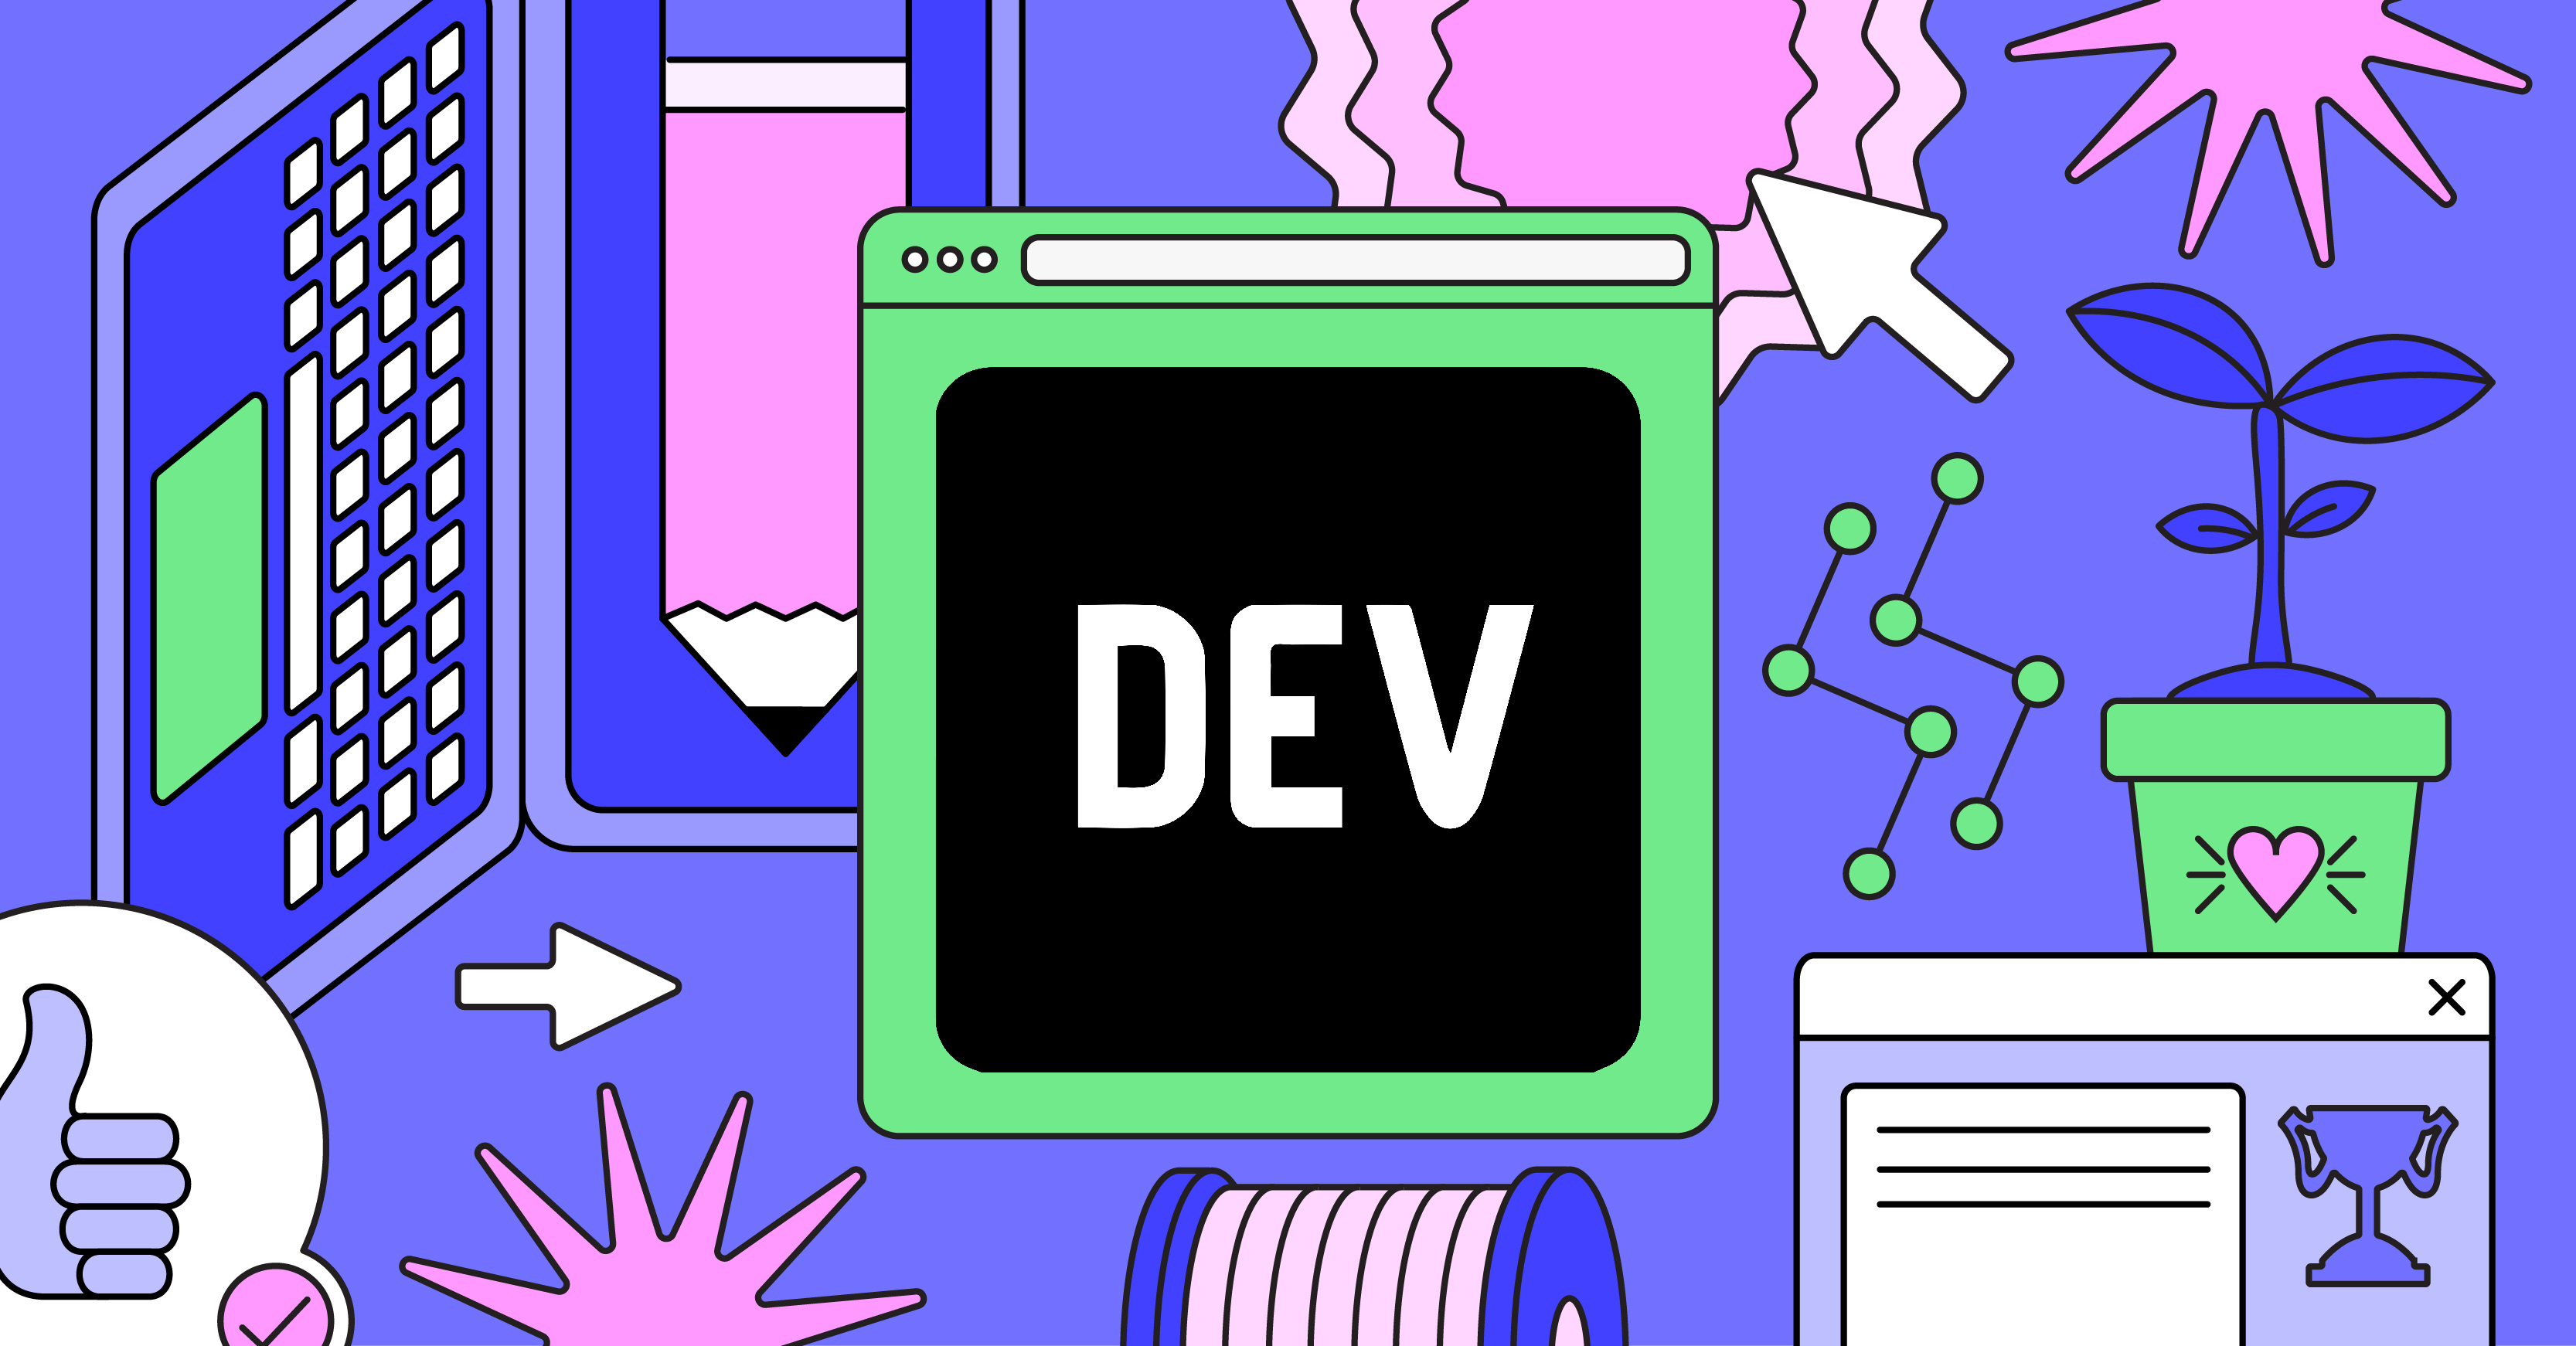 Who Developed What?  - DEV Community 👩‍💻👨‍💻